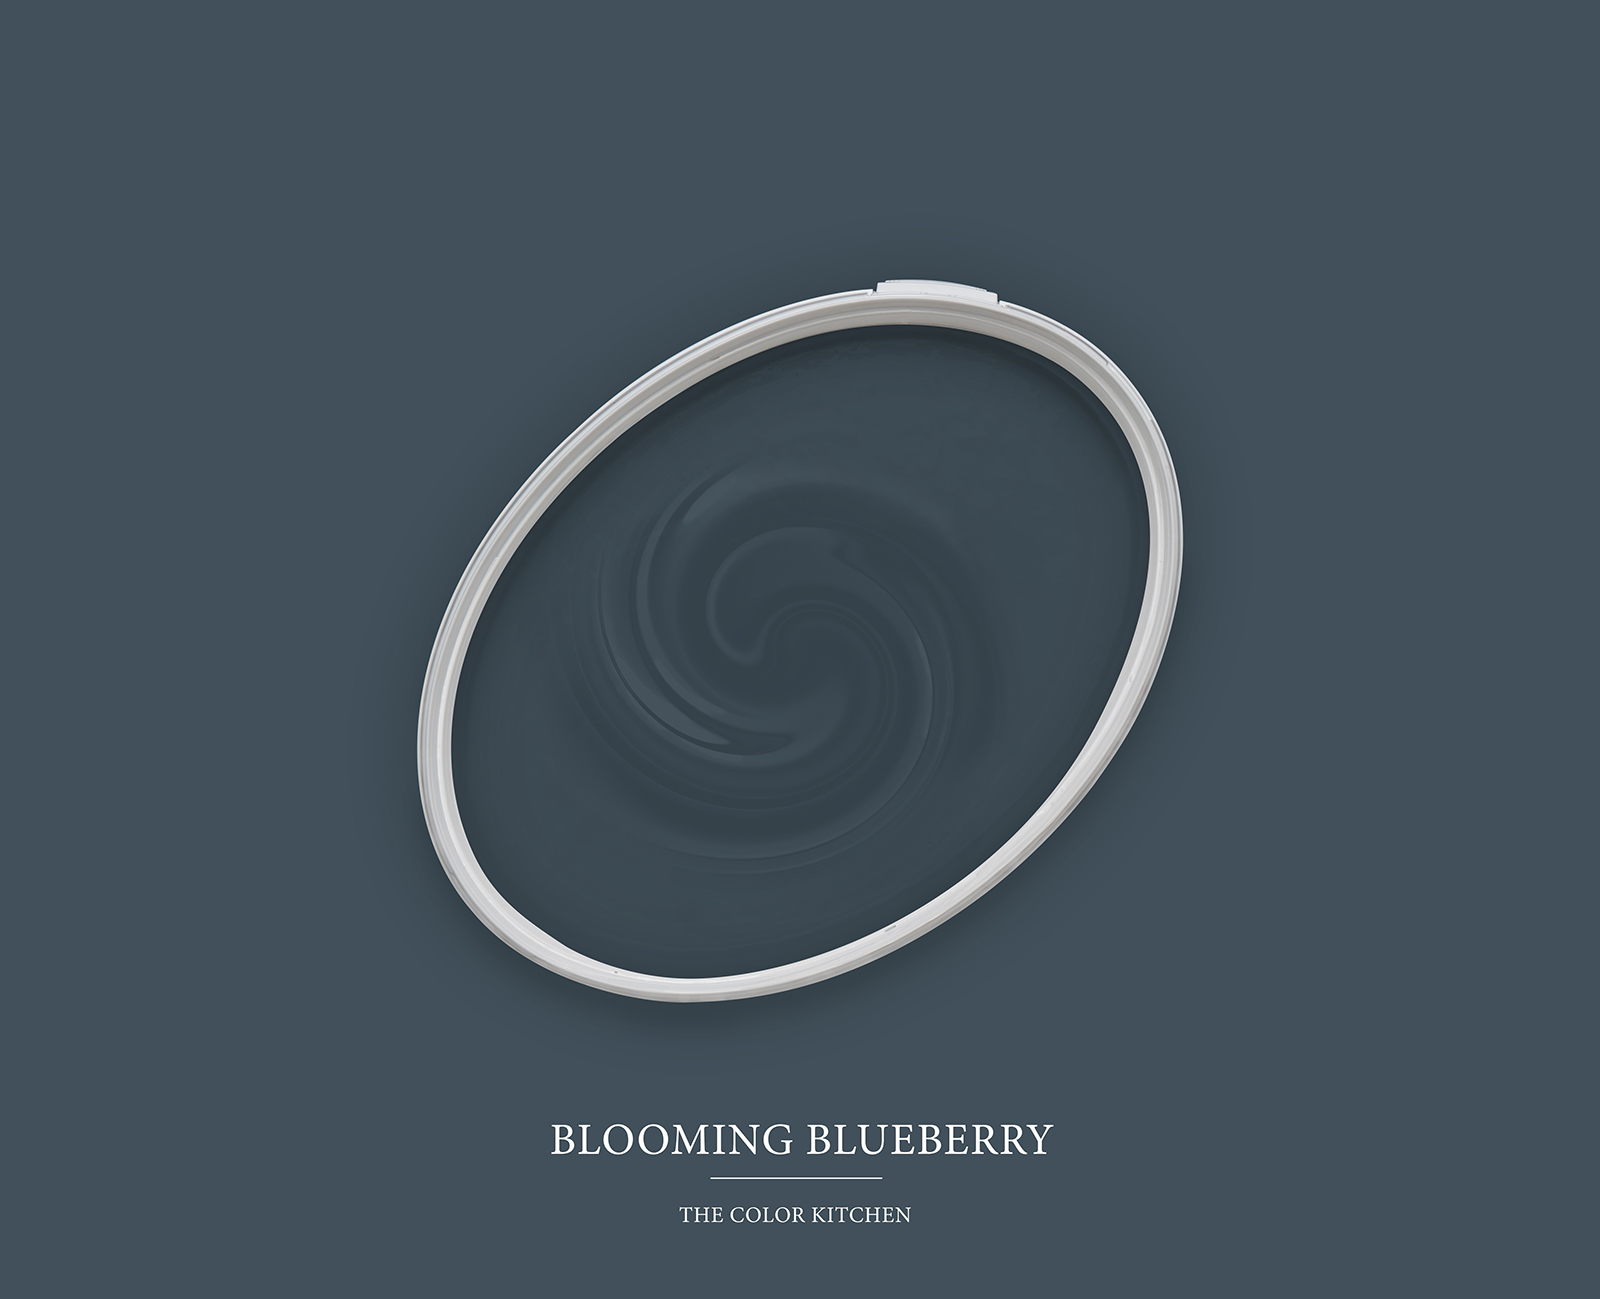         Wall Paint TCK3013 »Blooming Blueberry« in magnificent dark blue – 2.5 litre
    